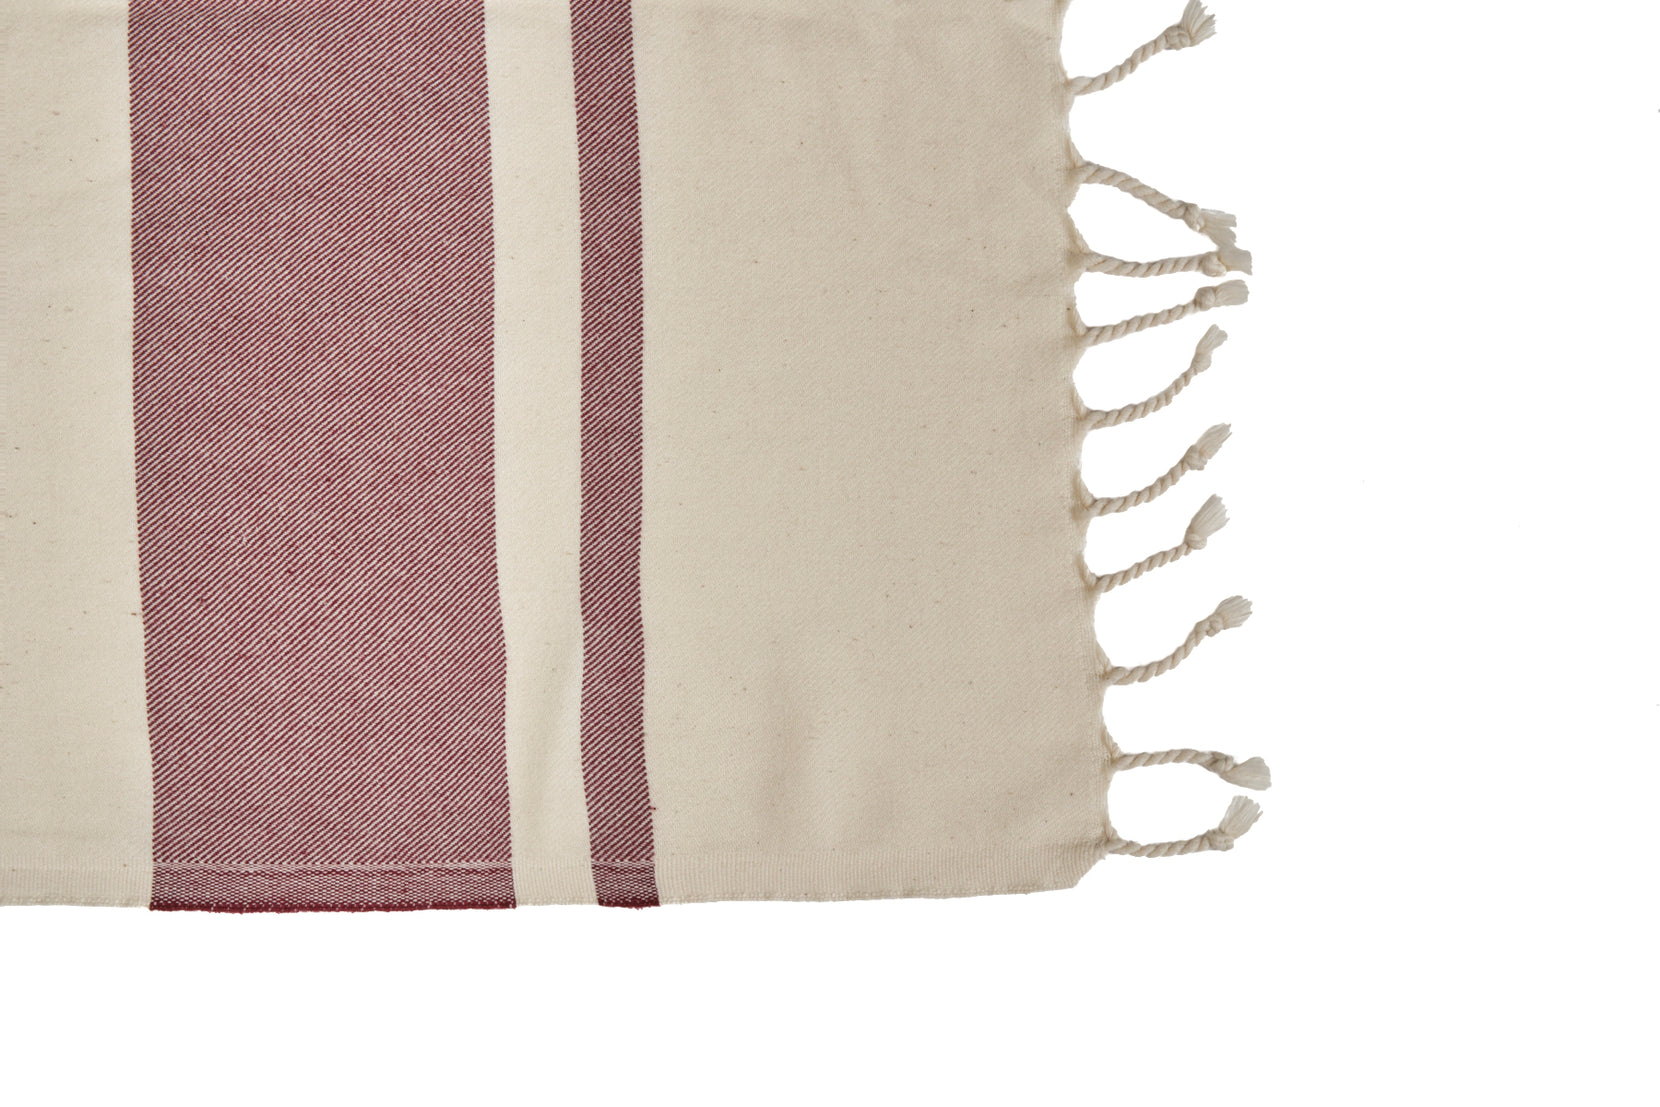 Extra Soft&Highly Absorbent Cream Striped Cotton Tea Towel, Hand